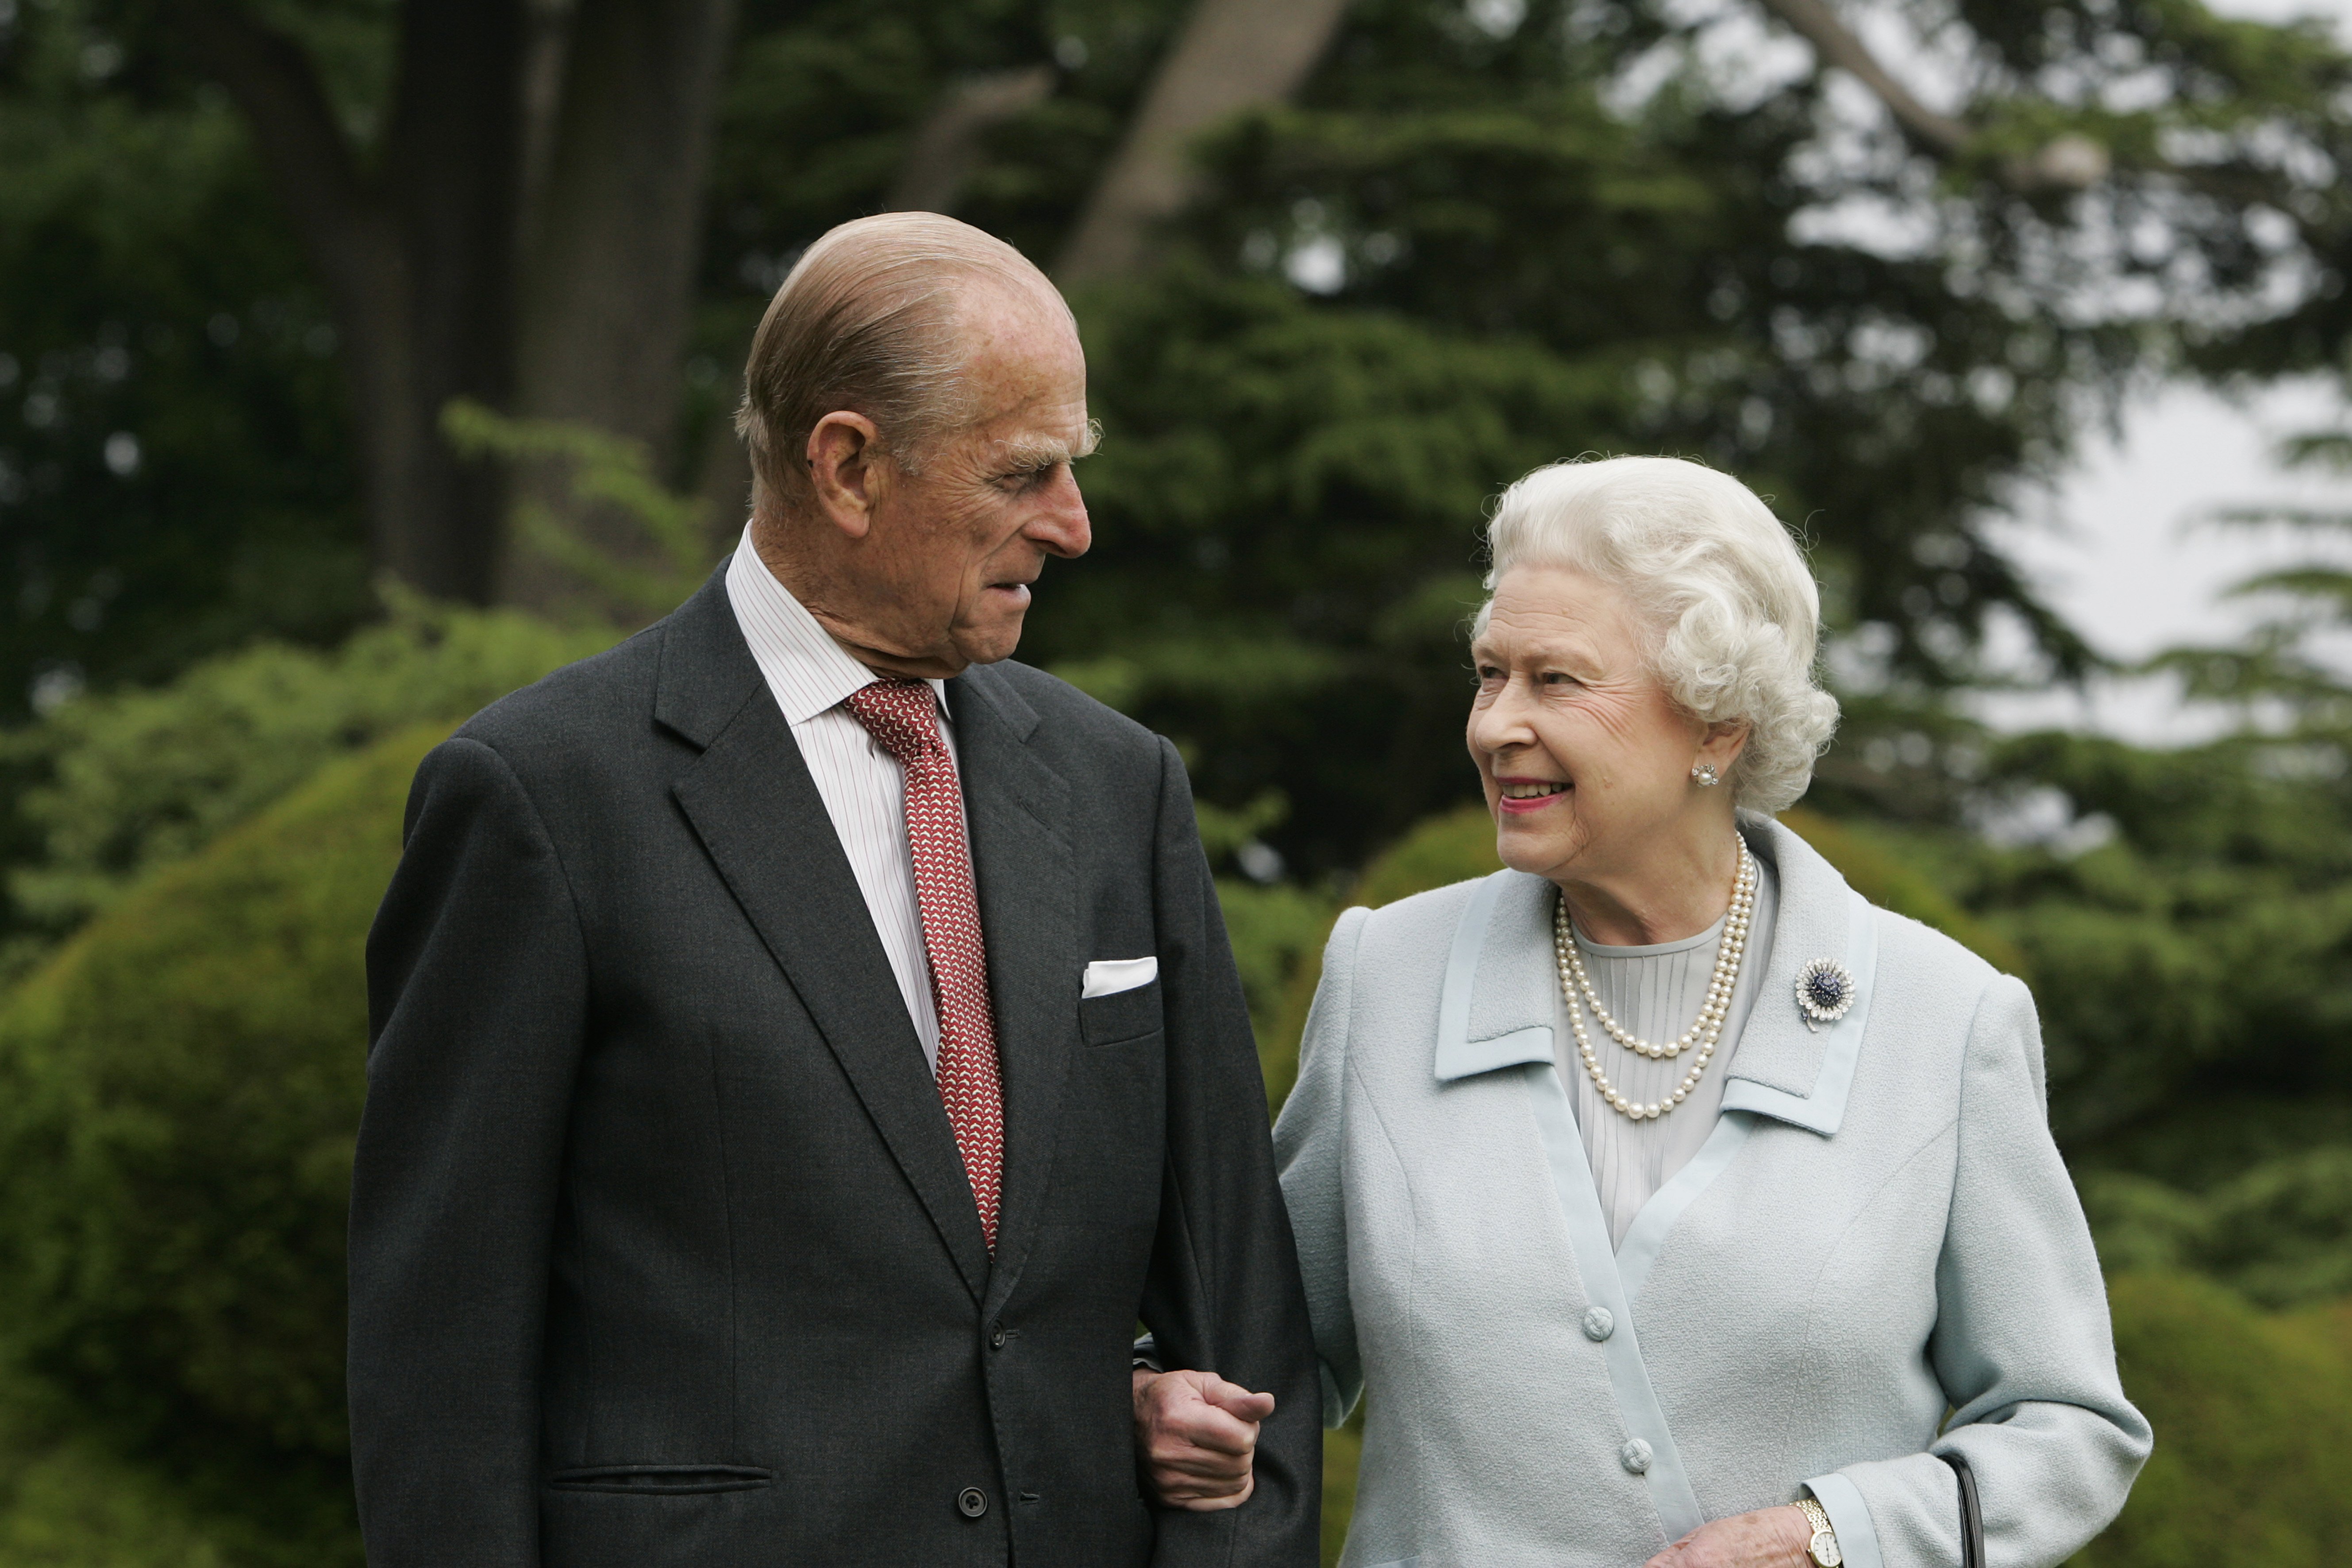 HM The Queen Elizabeth II and Prince Philip, The Duke of Edinburgh re-visit Broadlands, to mark their Diamond Wedding Anniversary on November 20. | Source: Getty Images